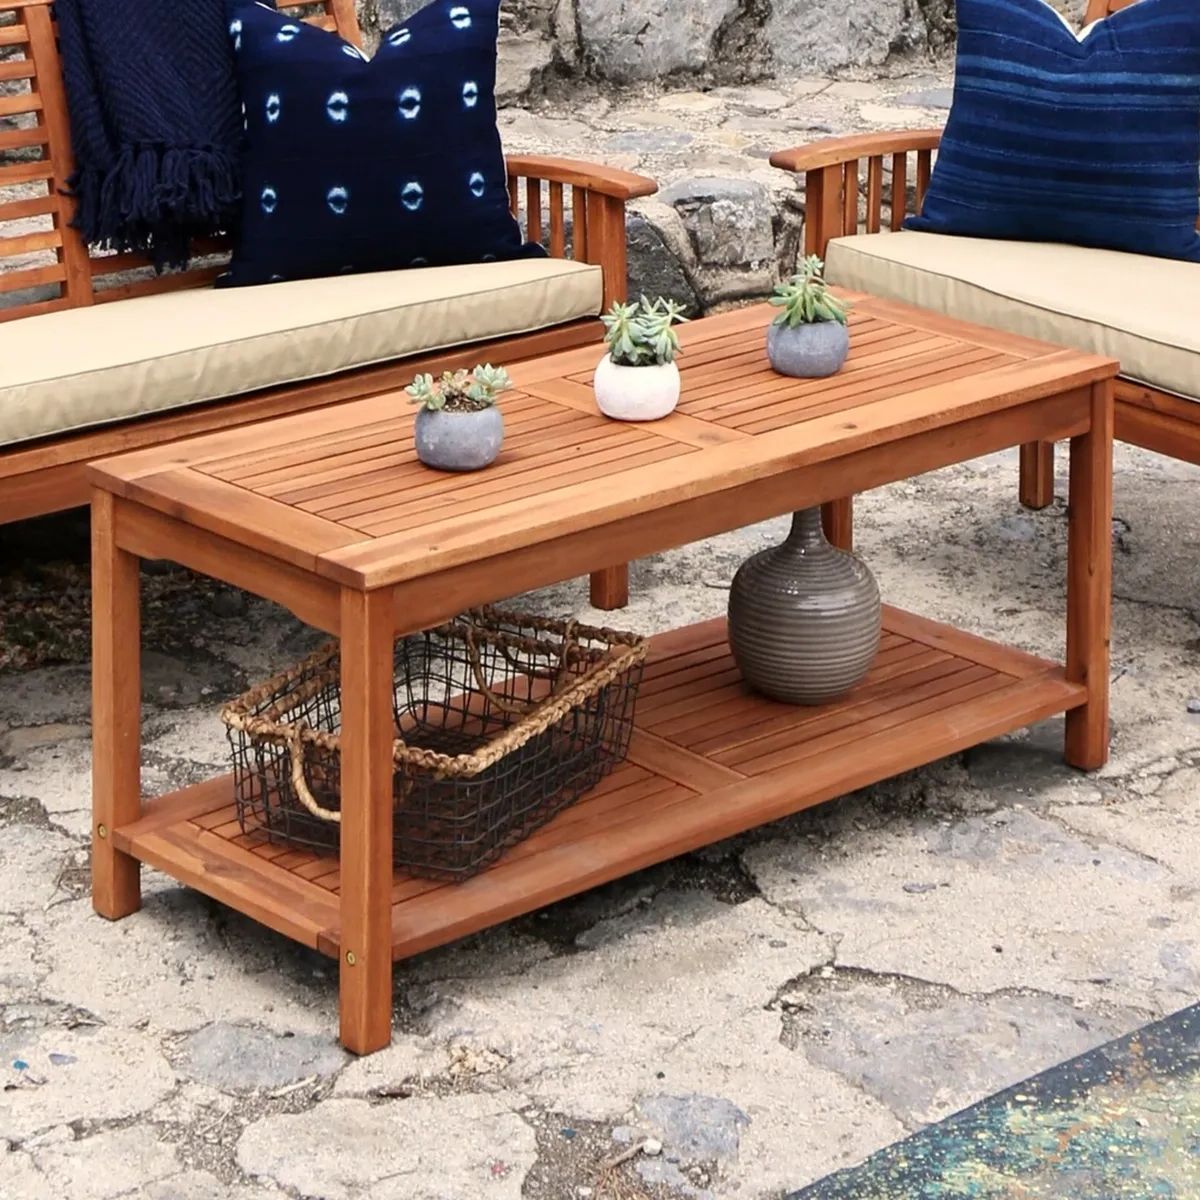 Ebay With Regard To Fashionable Outdoor Coffee Tables With Storage (Photo 8 of 10)